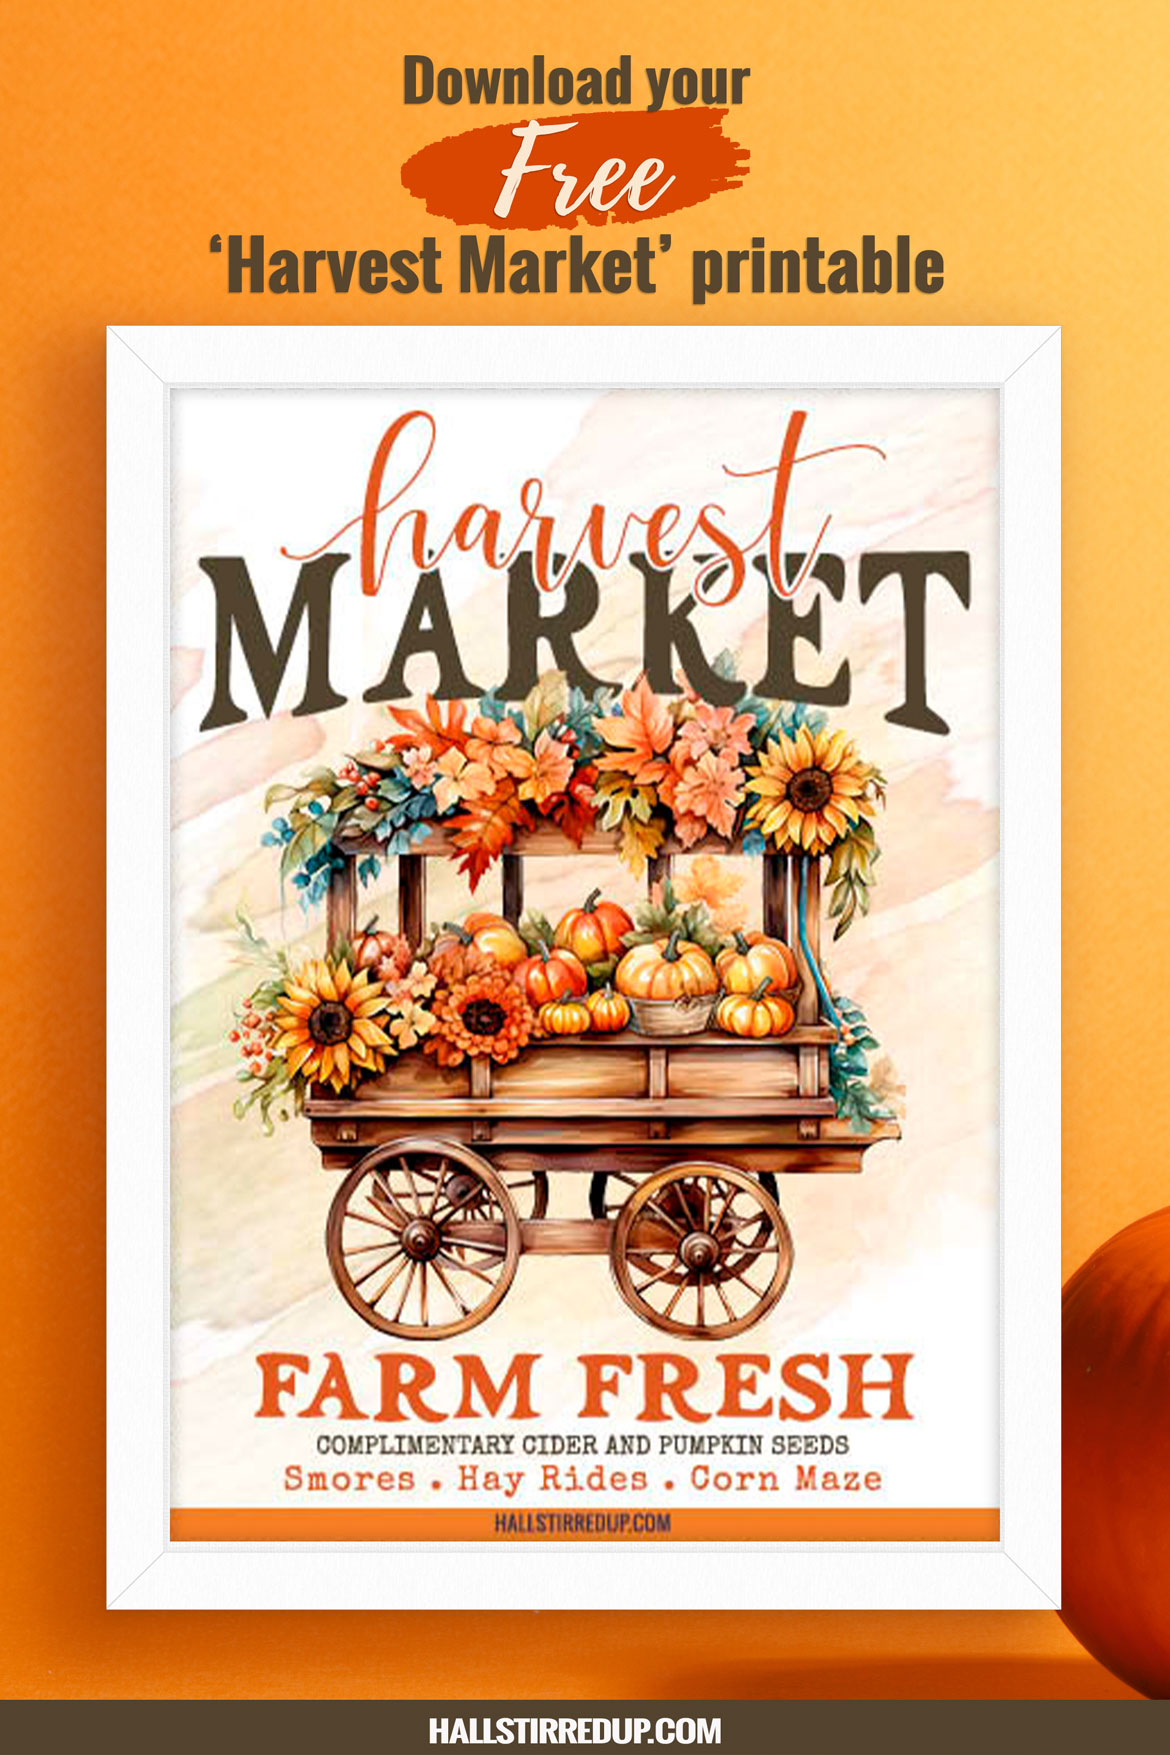 Let's go to the Harvest Market Includes free printable